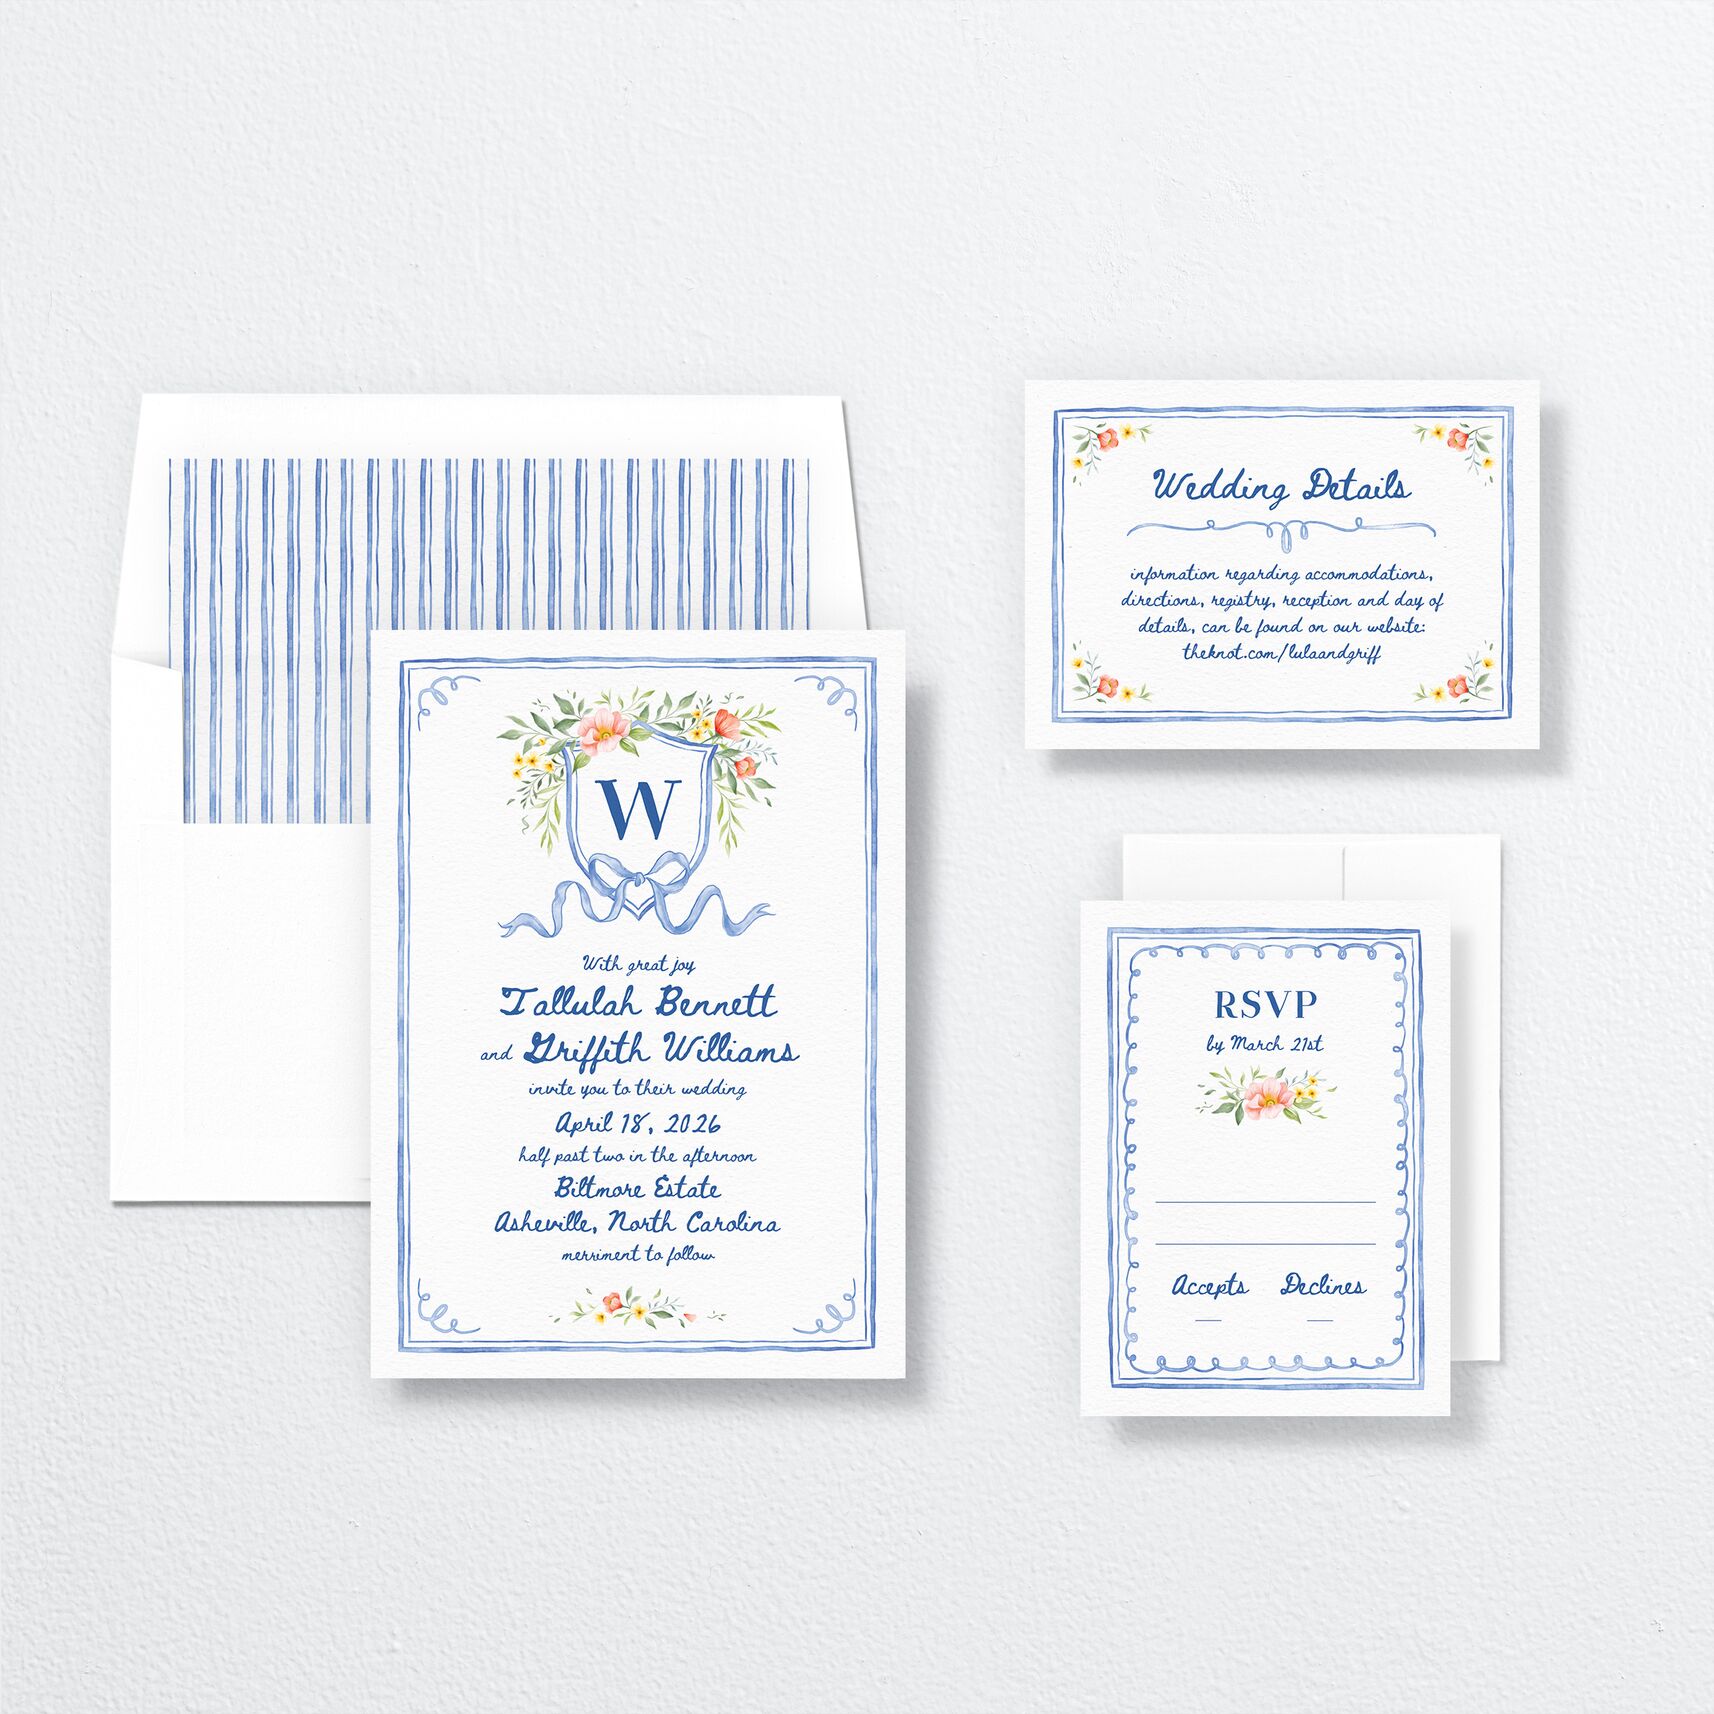 Countryside Crest Wedding Invitations suite in blue